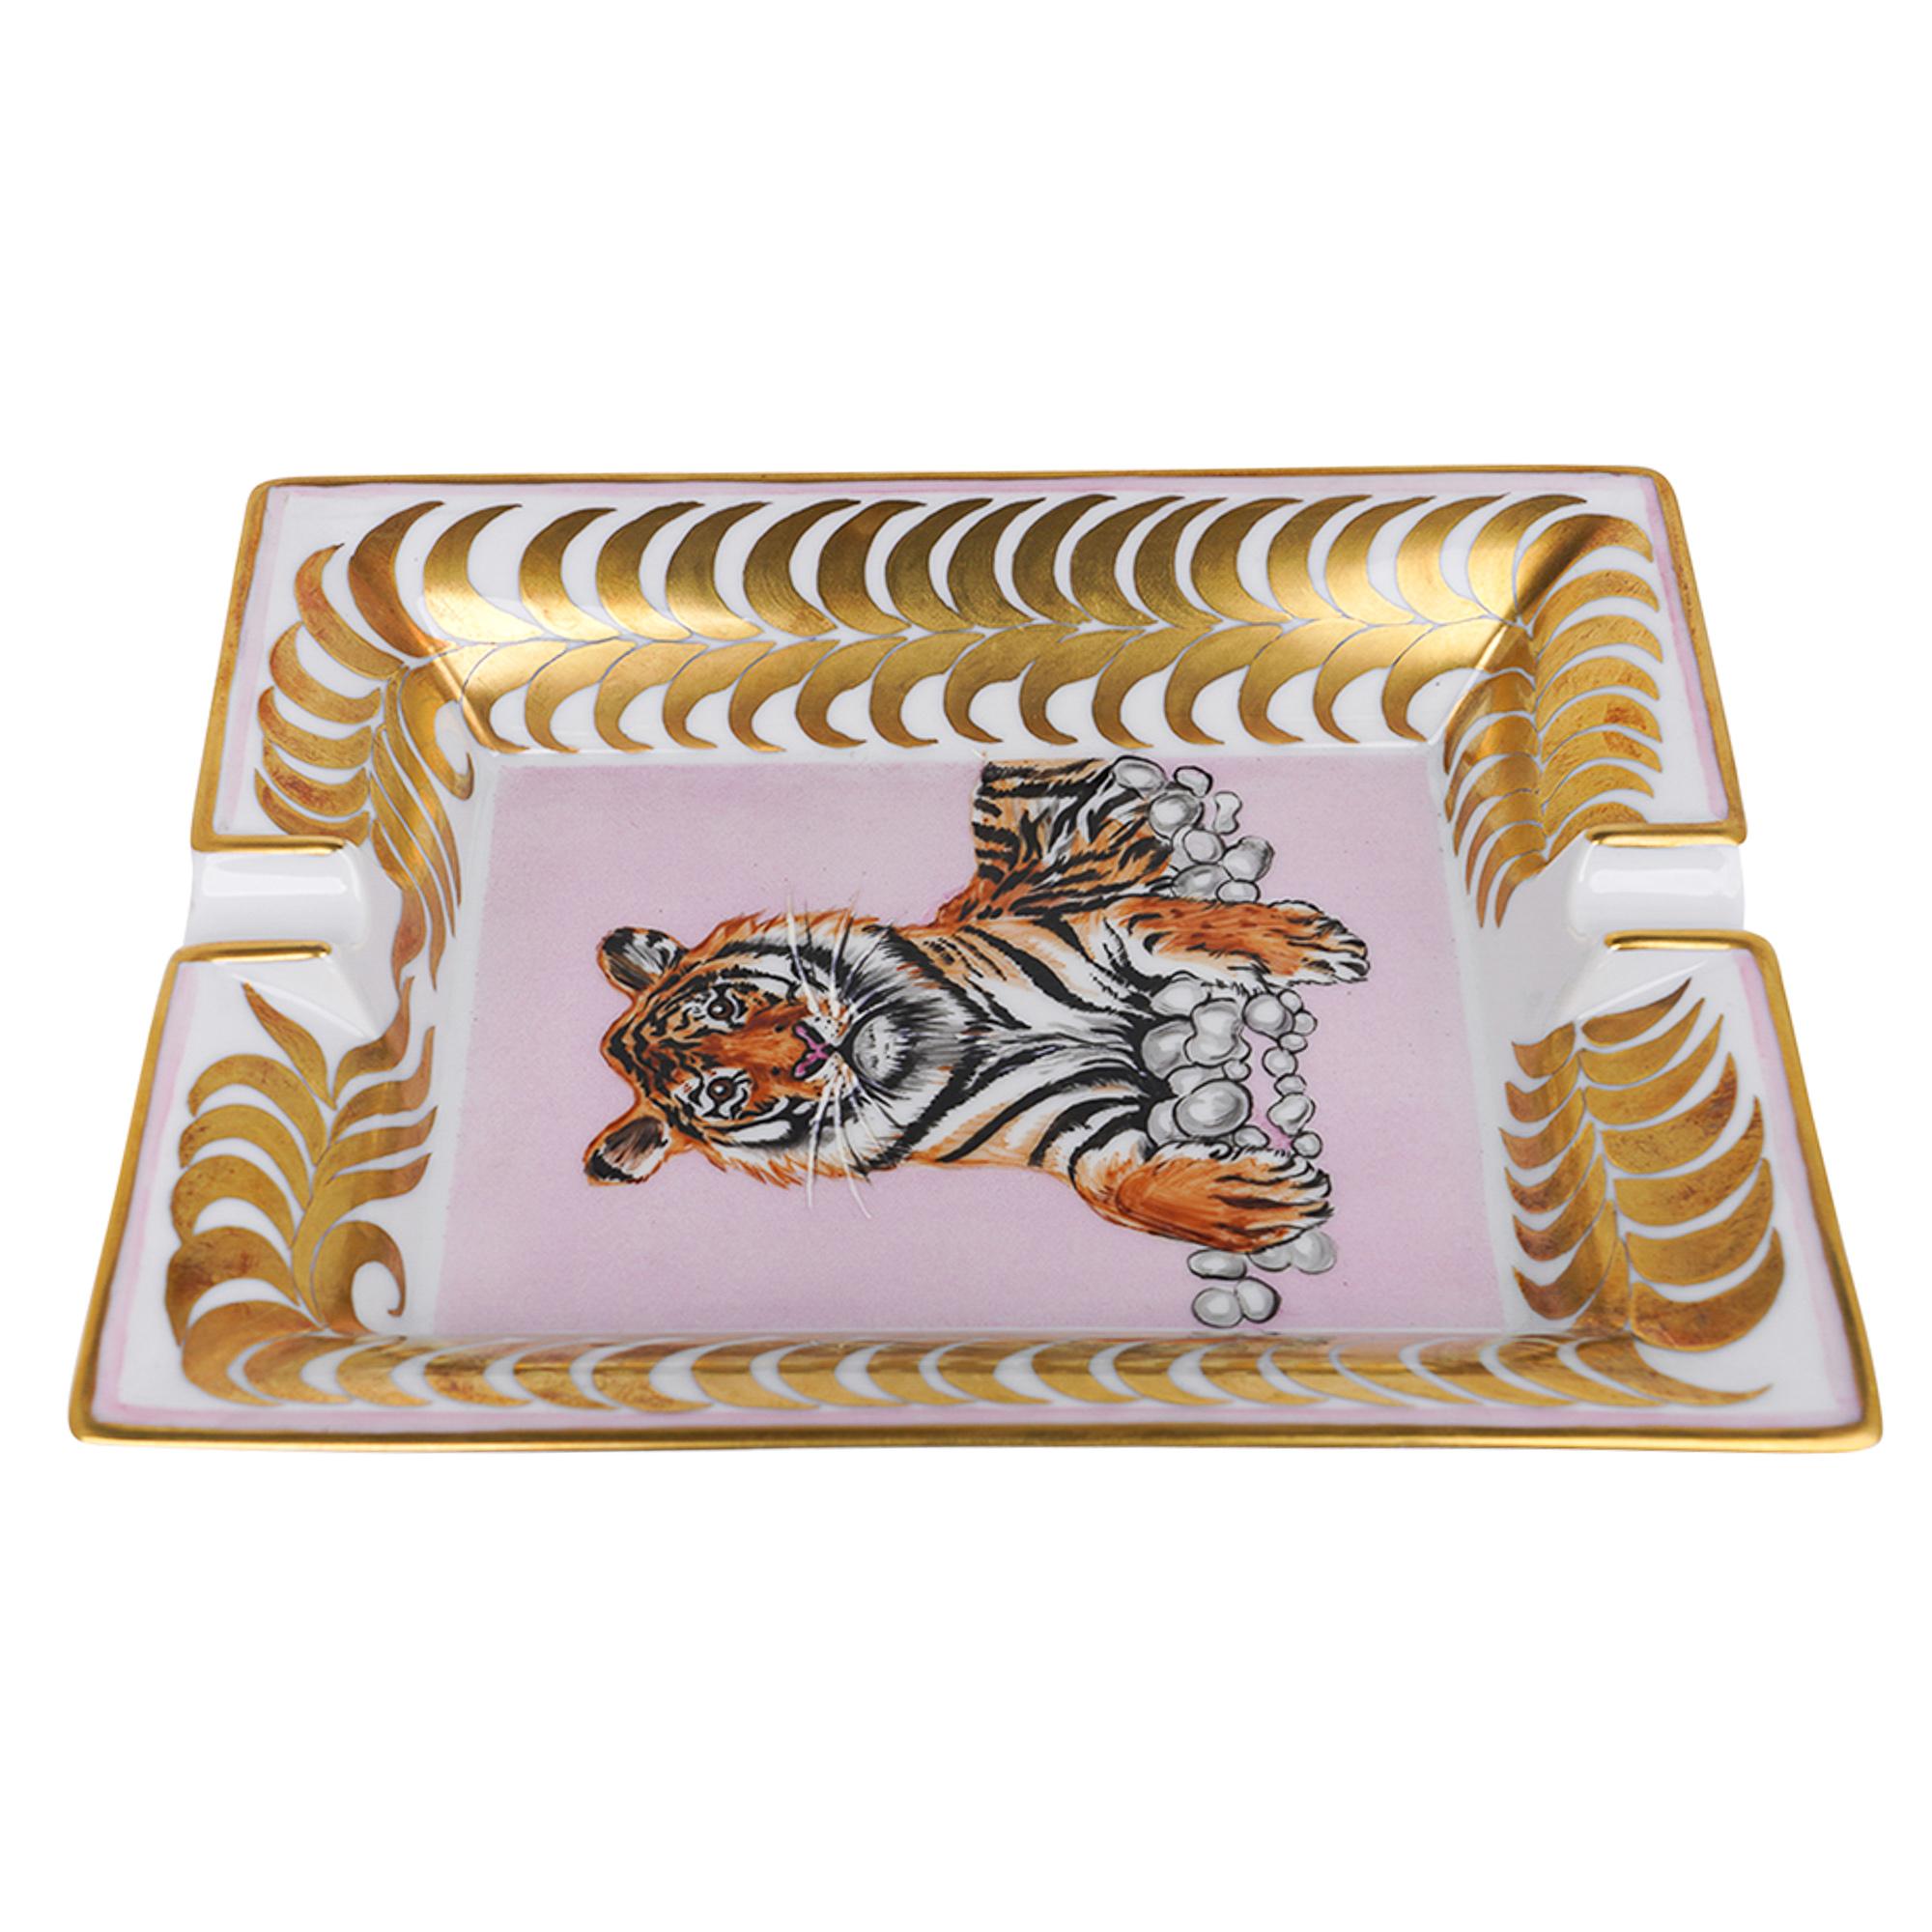 Beige Hermes Change Tray Tigre Royal Or / Rose Hand Painted New w/ Box For Sale